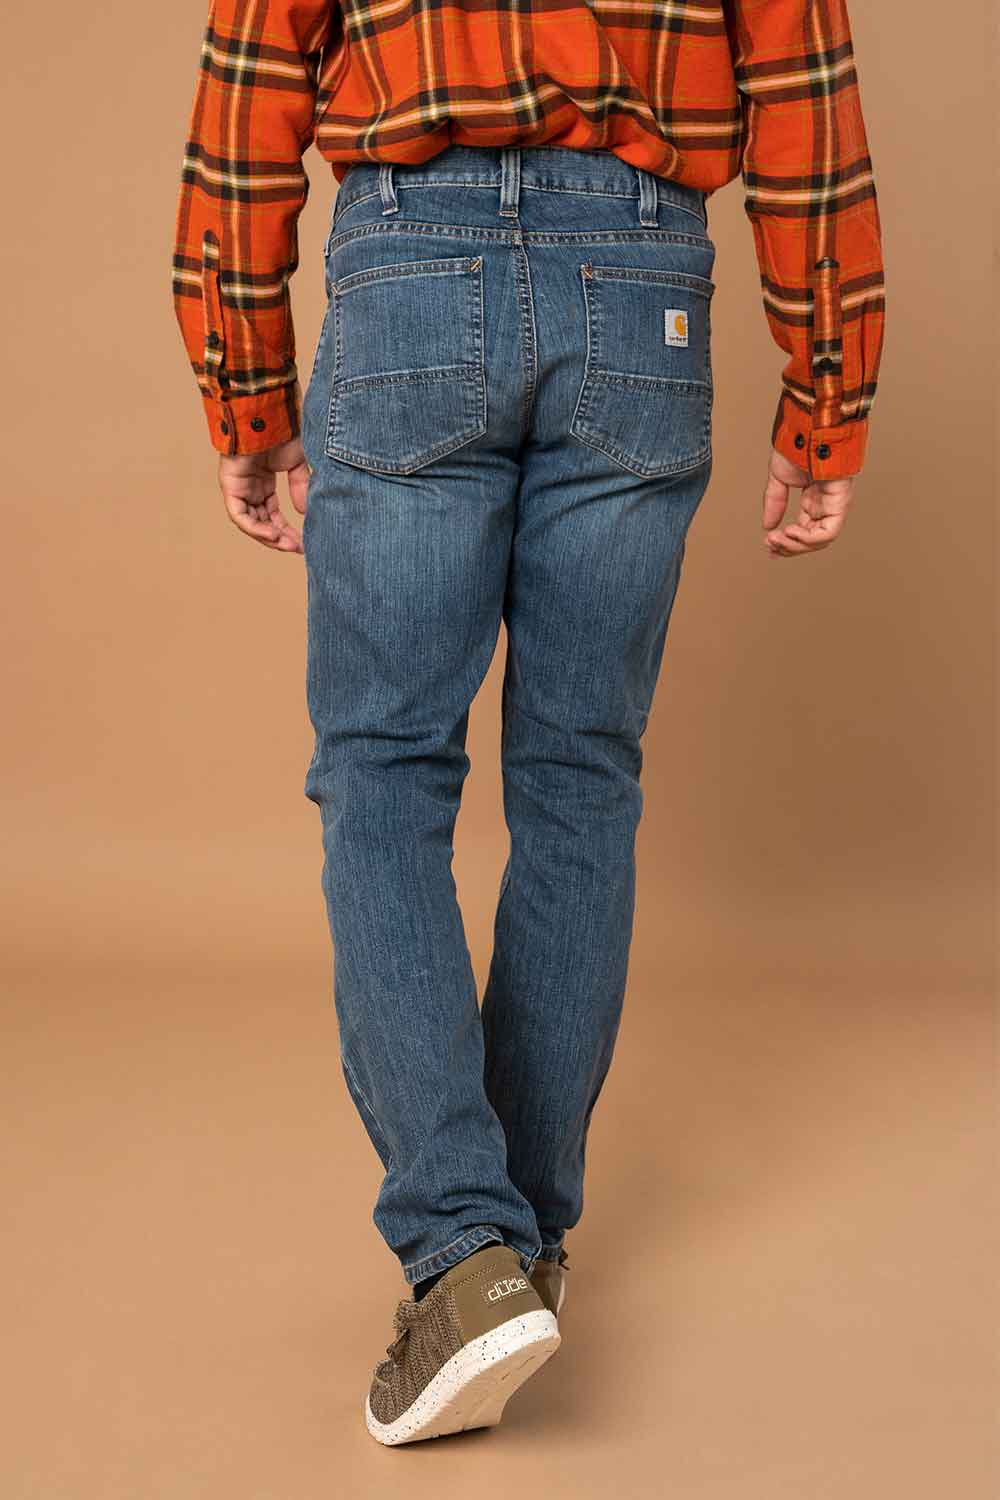 Durable and Stylish Carhartt Pants for Men